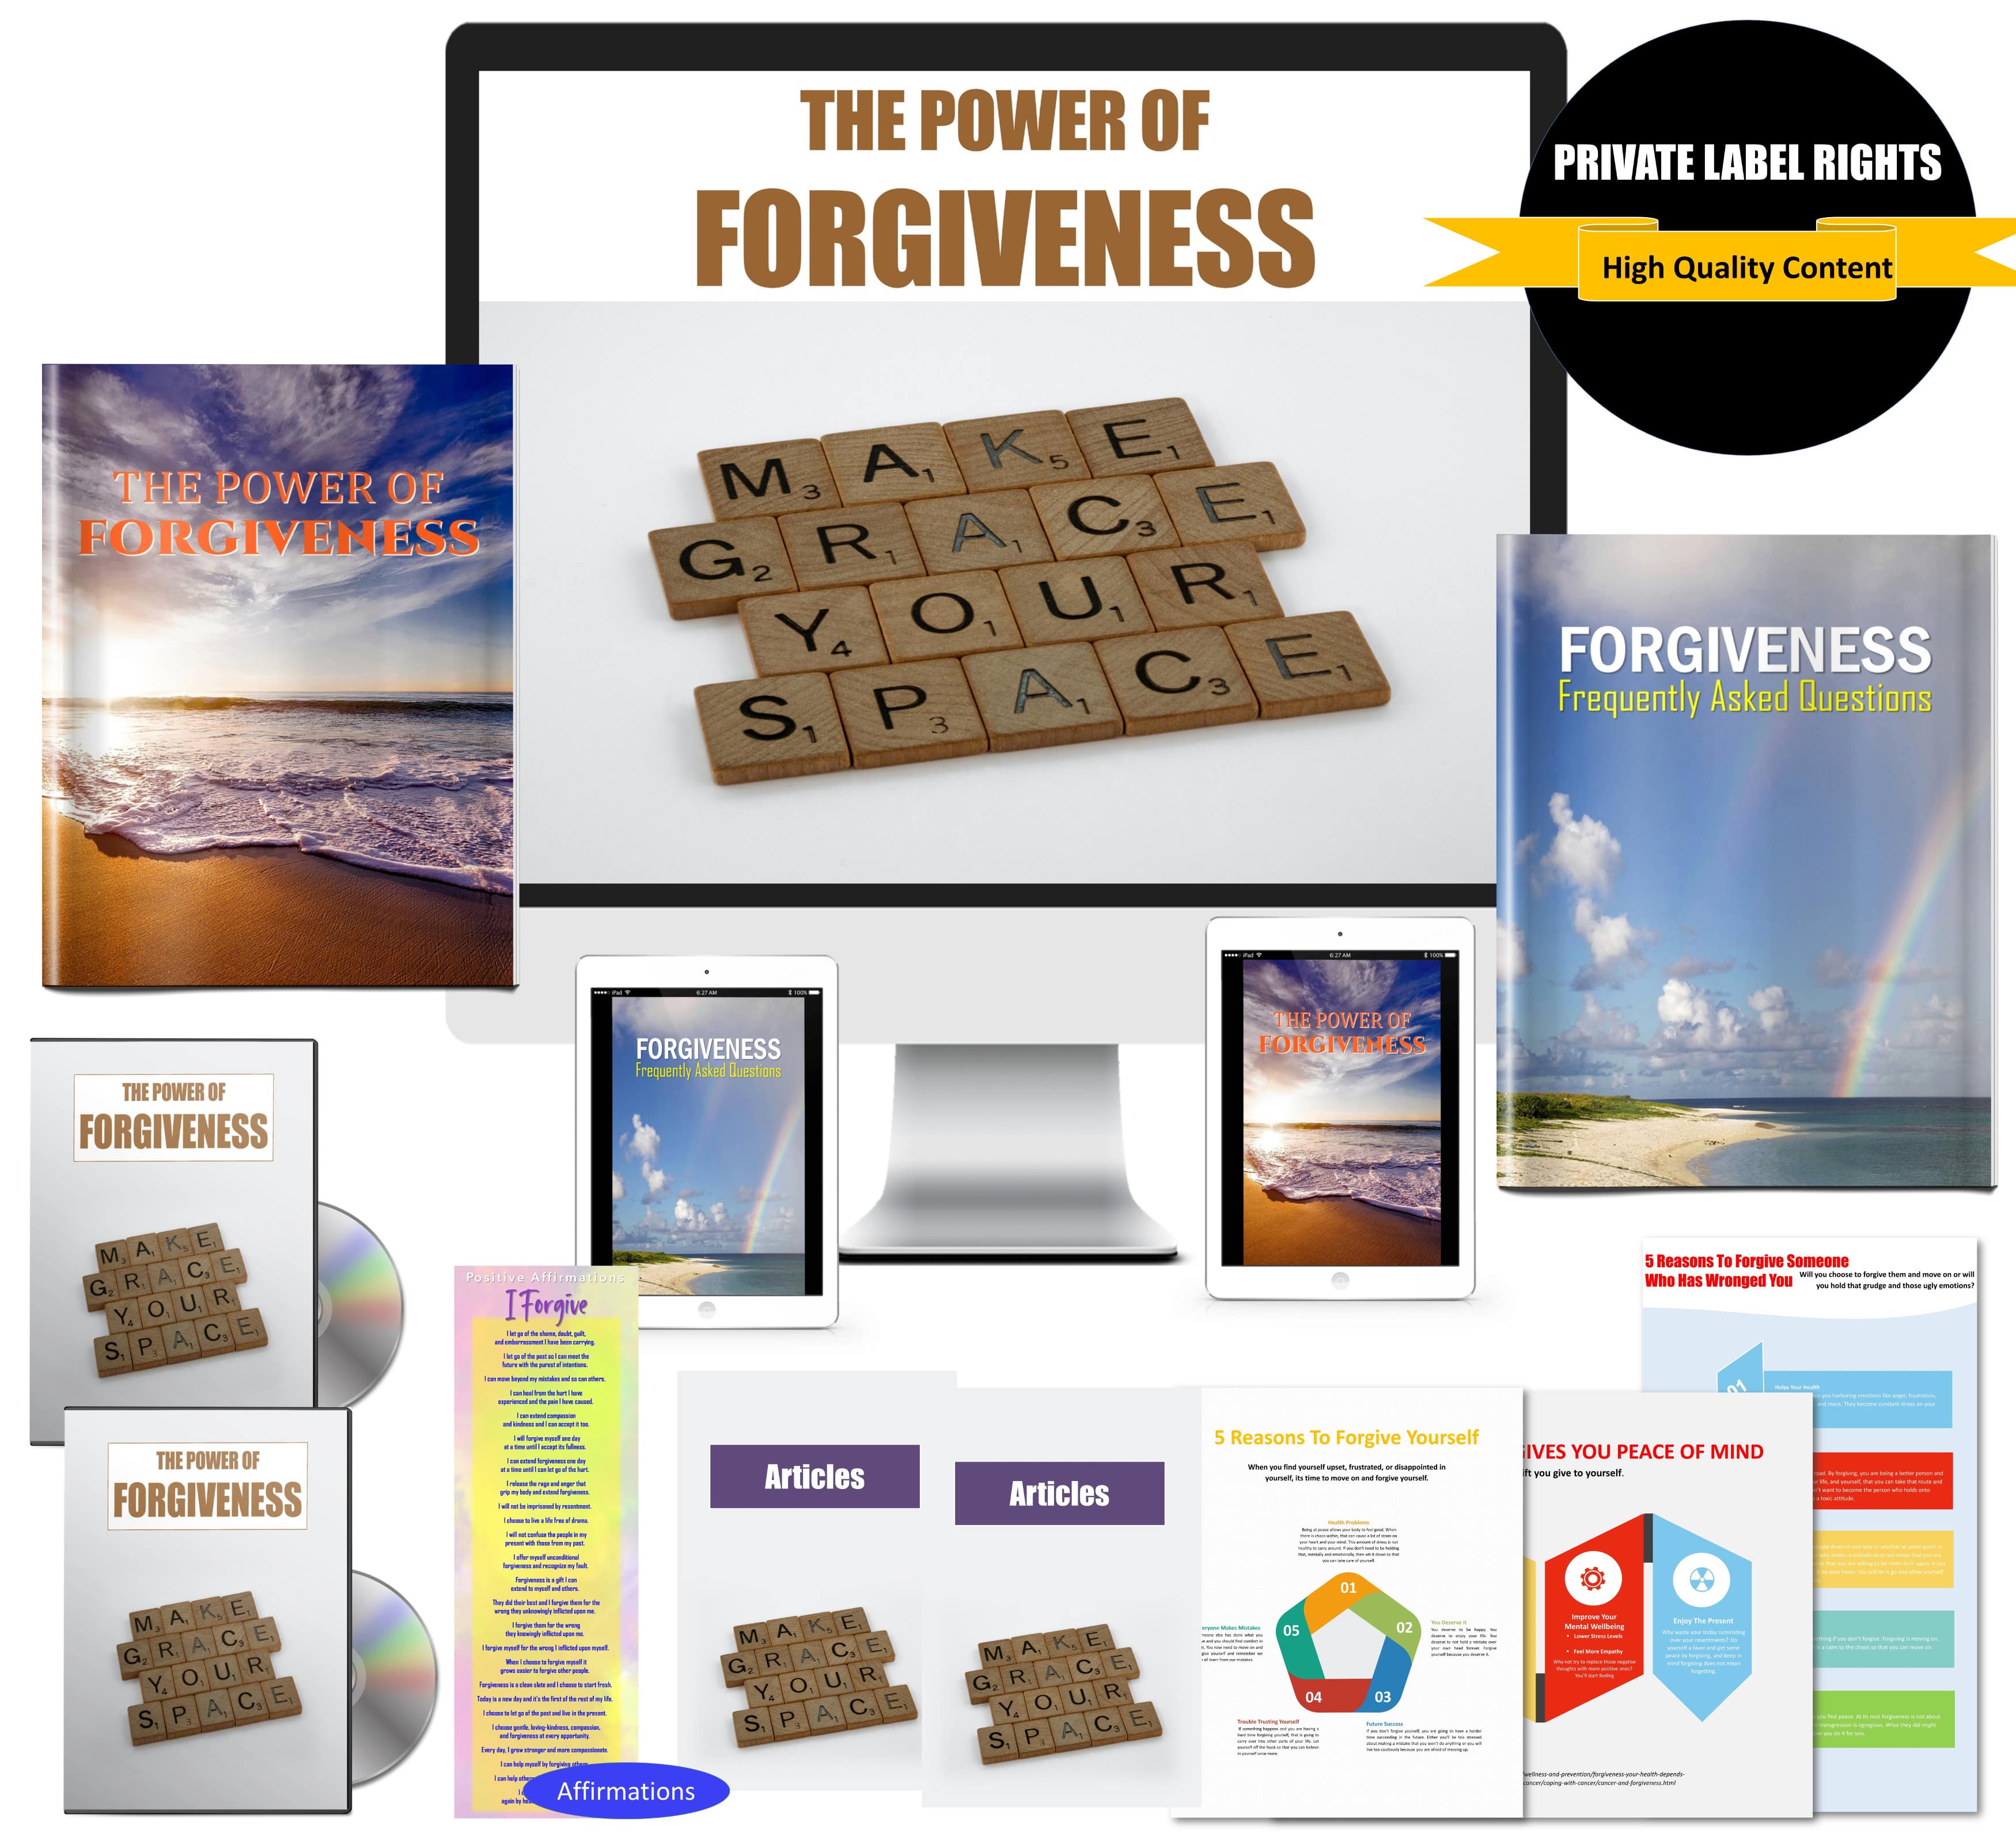 Forgiveness Report, eBook and Content with PLR Rights